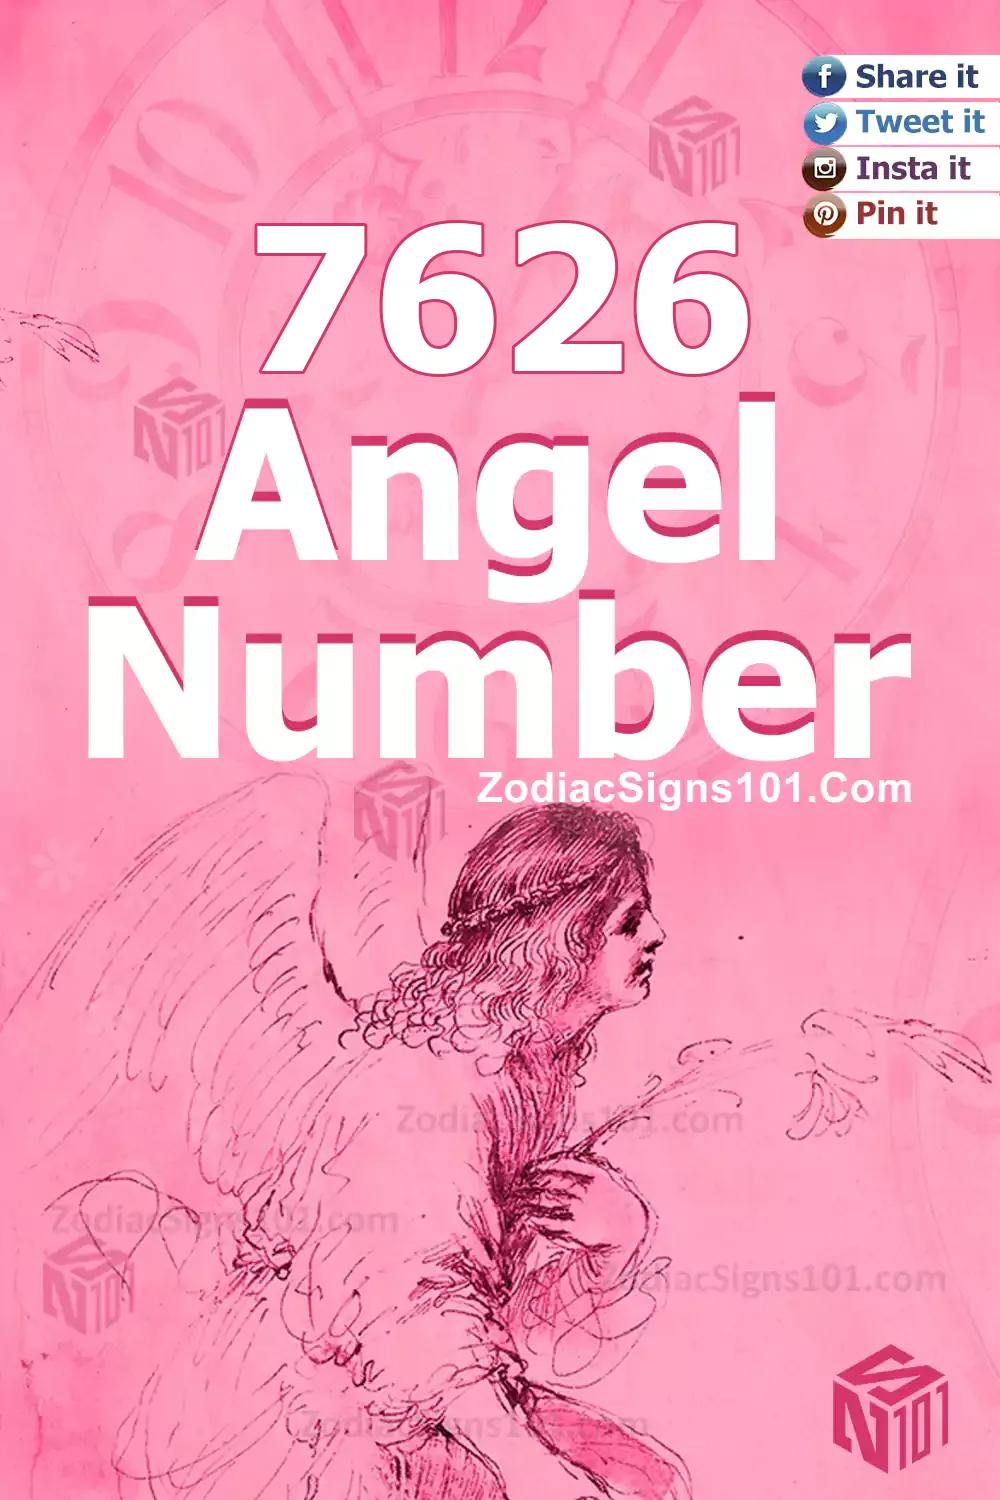 7626 Angel Number Meaning